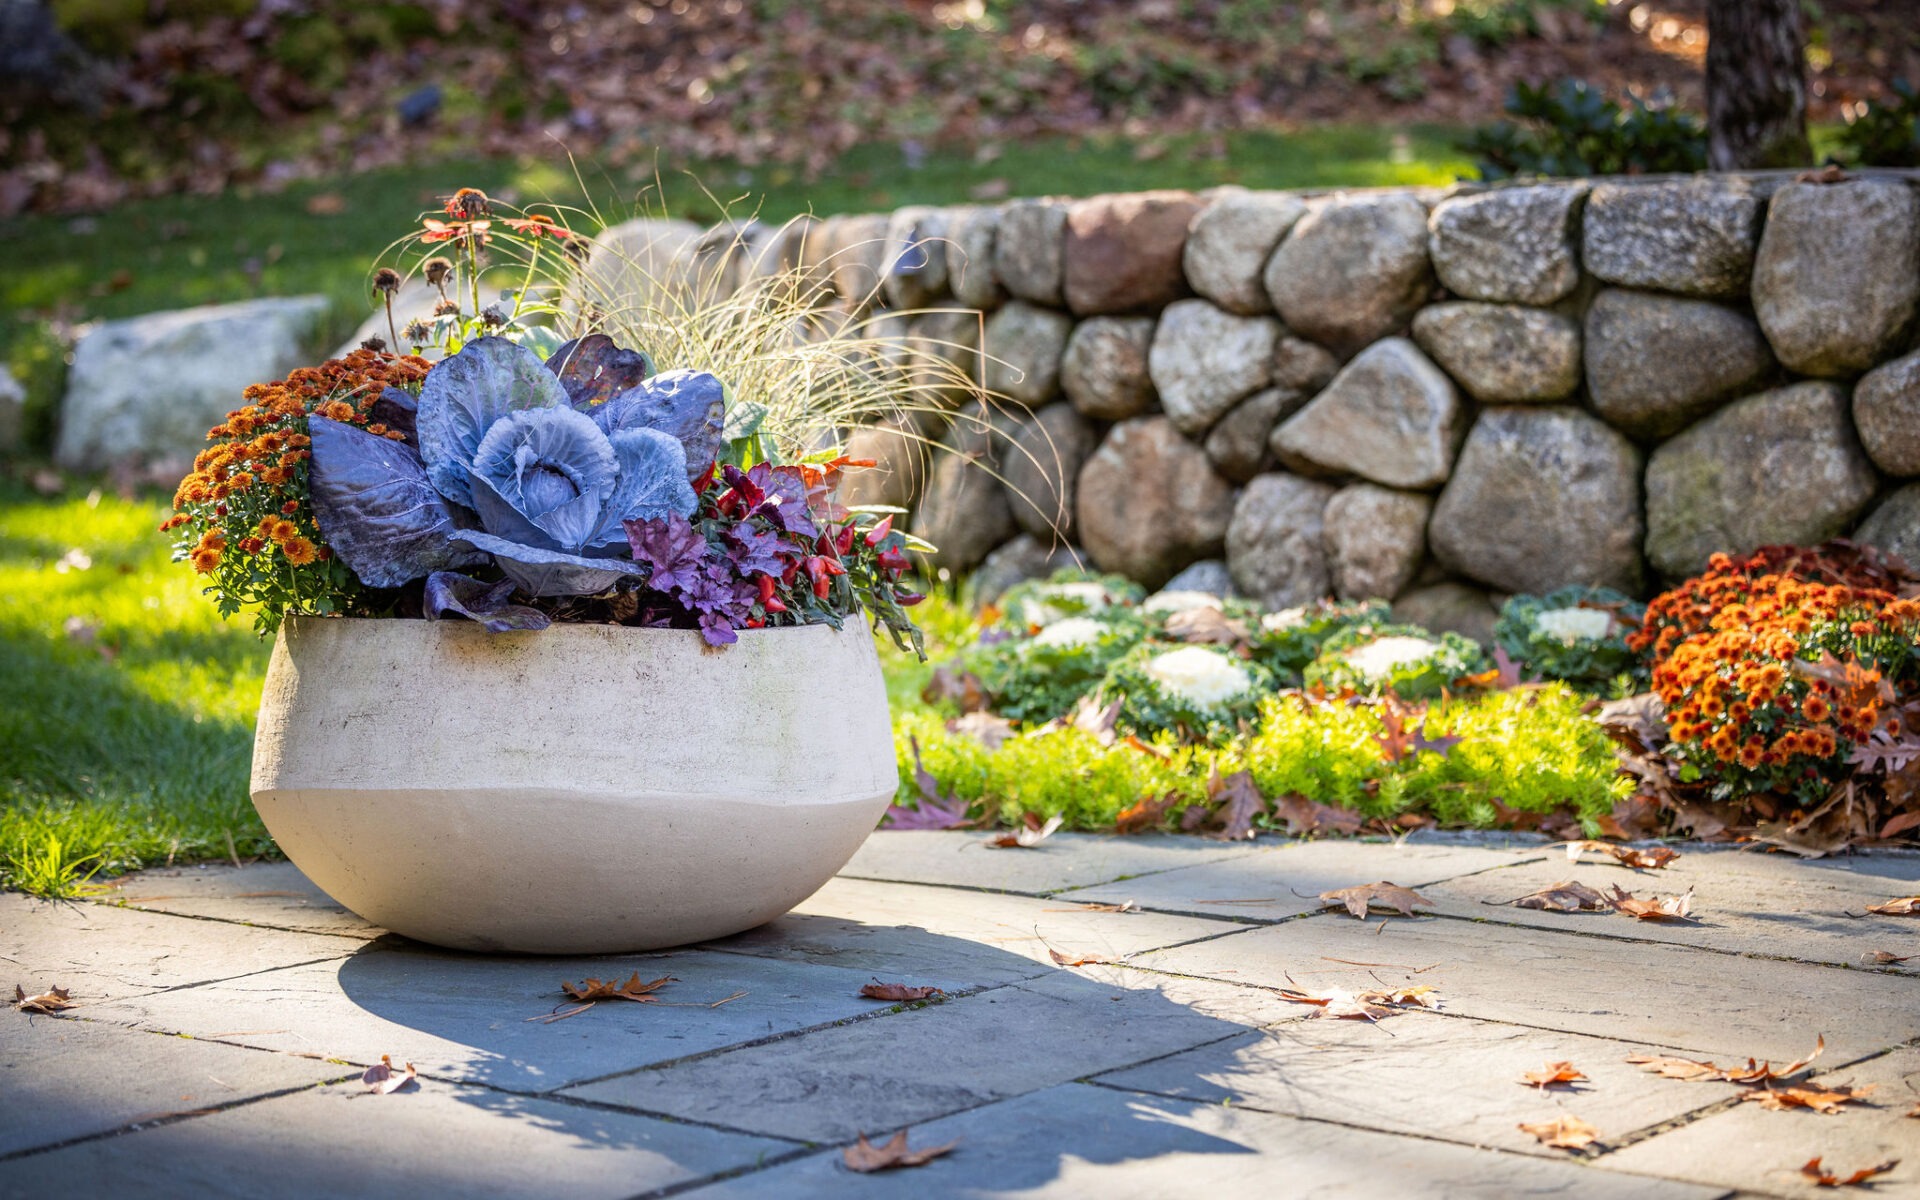 A large planter with blue and orange flowers sits on a stone-paved patio with a stone wall and autumn leaves scattered around.